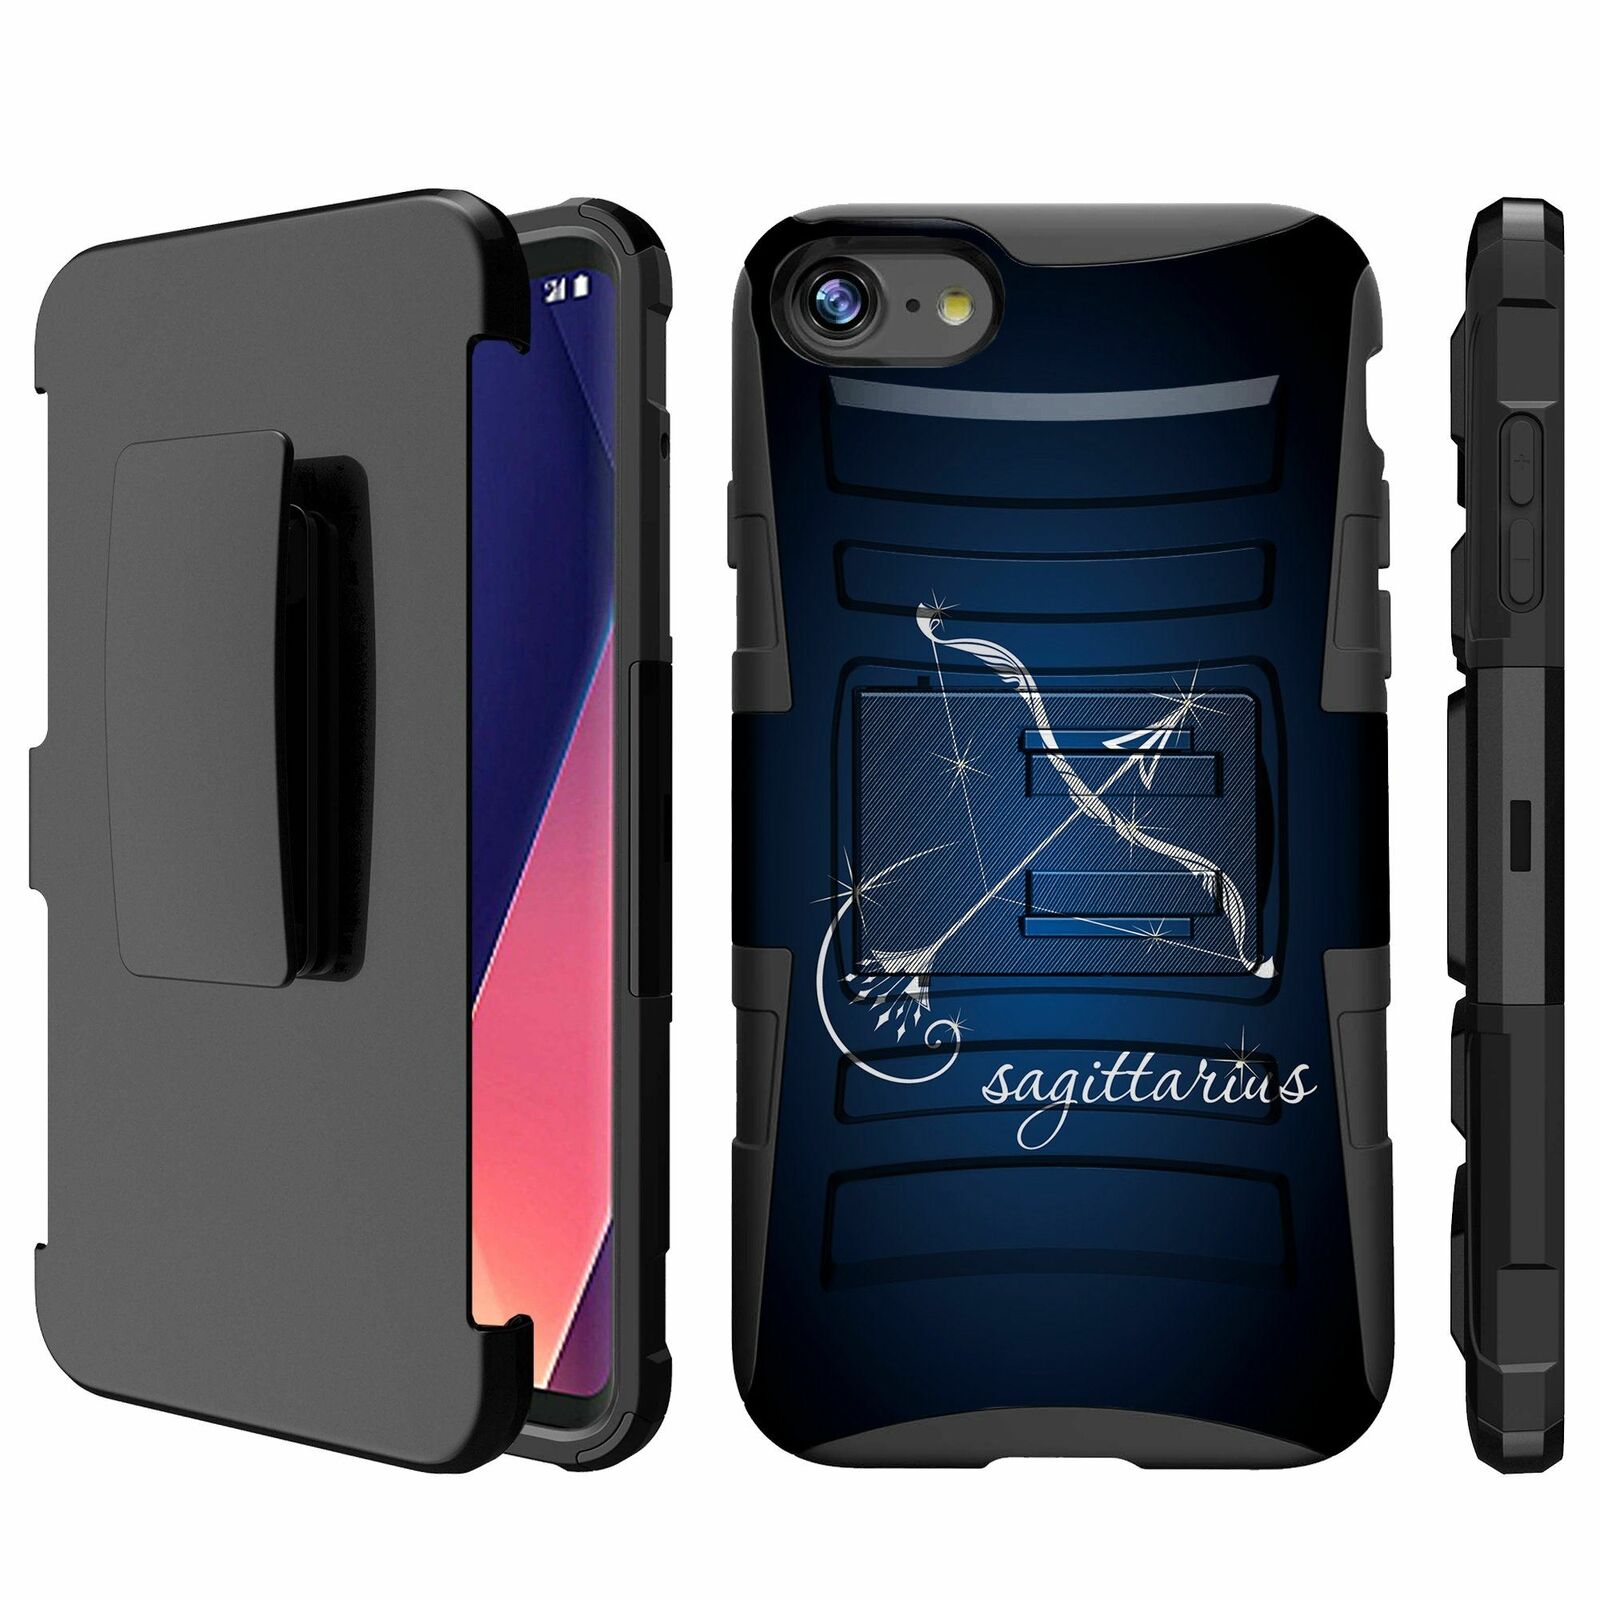 For Apple iPhone 7 | iPhone 7 2016 Holster & Kickstand Combo Case-Zodiac Signs iPhone Cases AtlasCase Sagittarius 